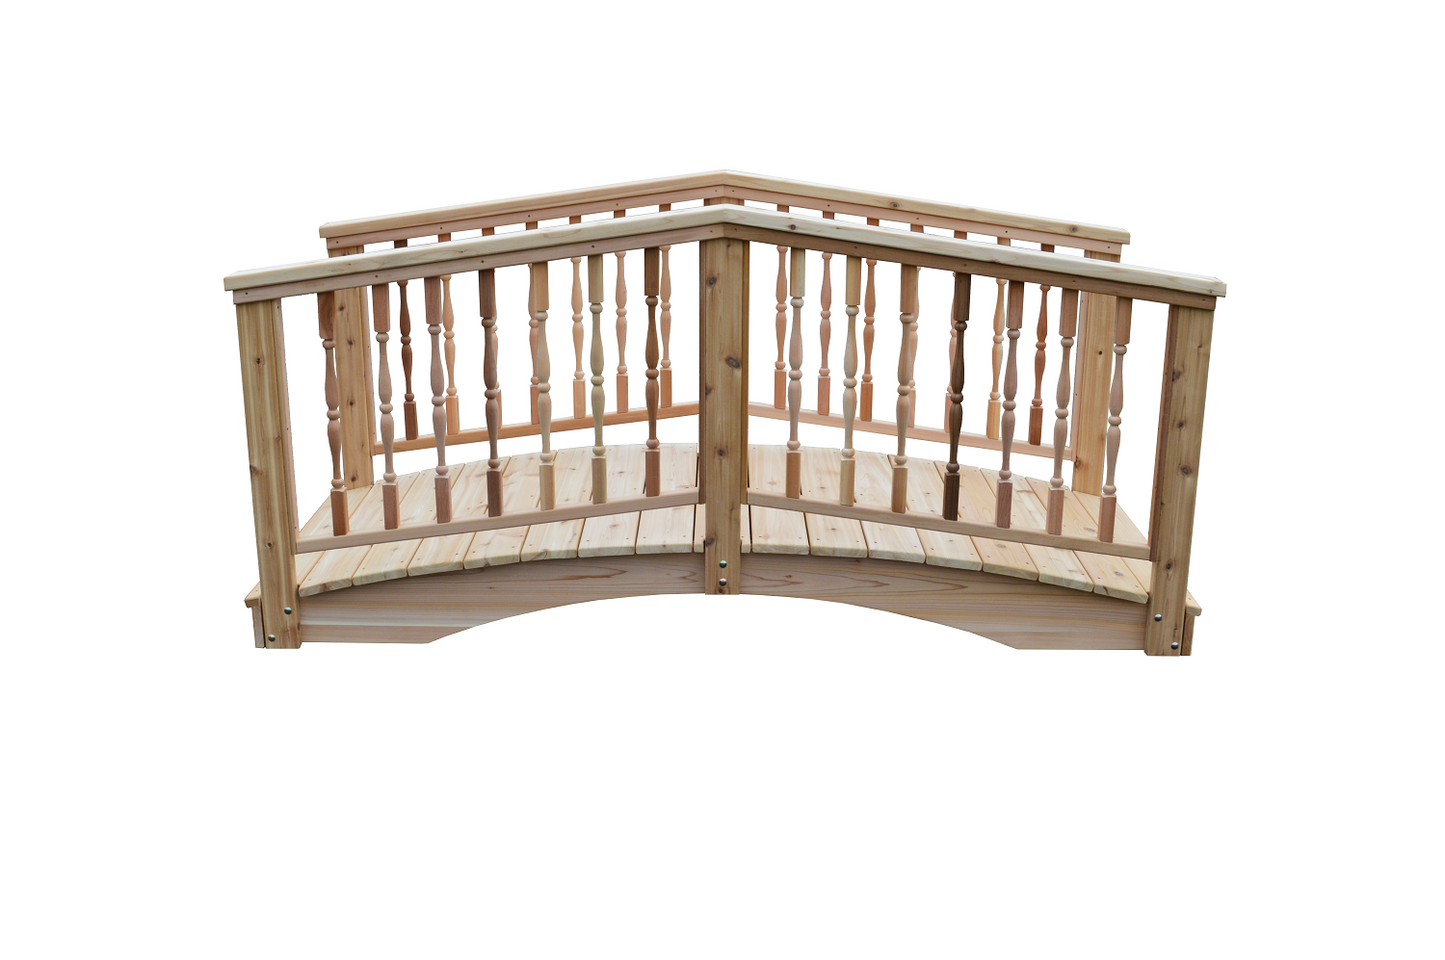 A&L Furniture Co. Western Red Cedar 3' x 12' Spindle Bridge - LEAD TIME TO SHIP 4 WEEKS OR LESS